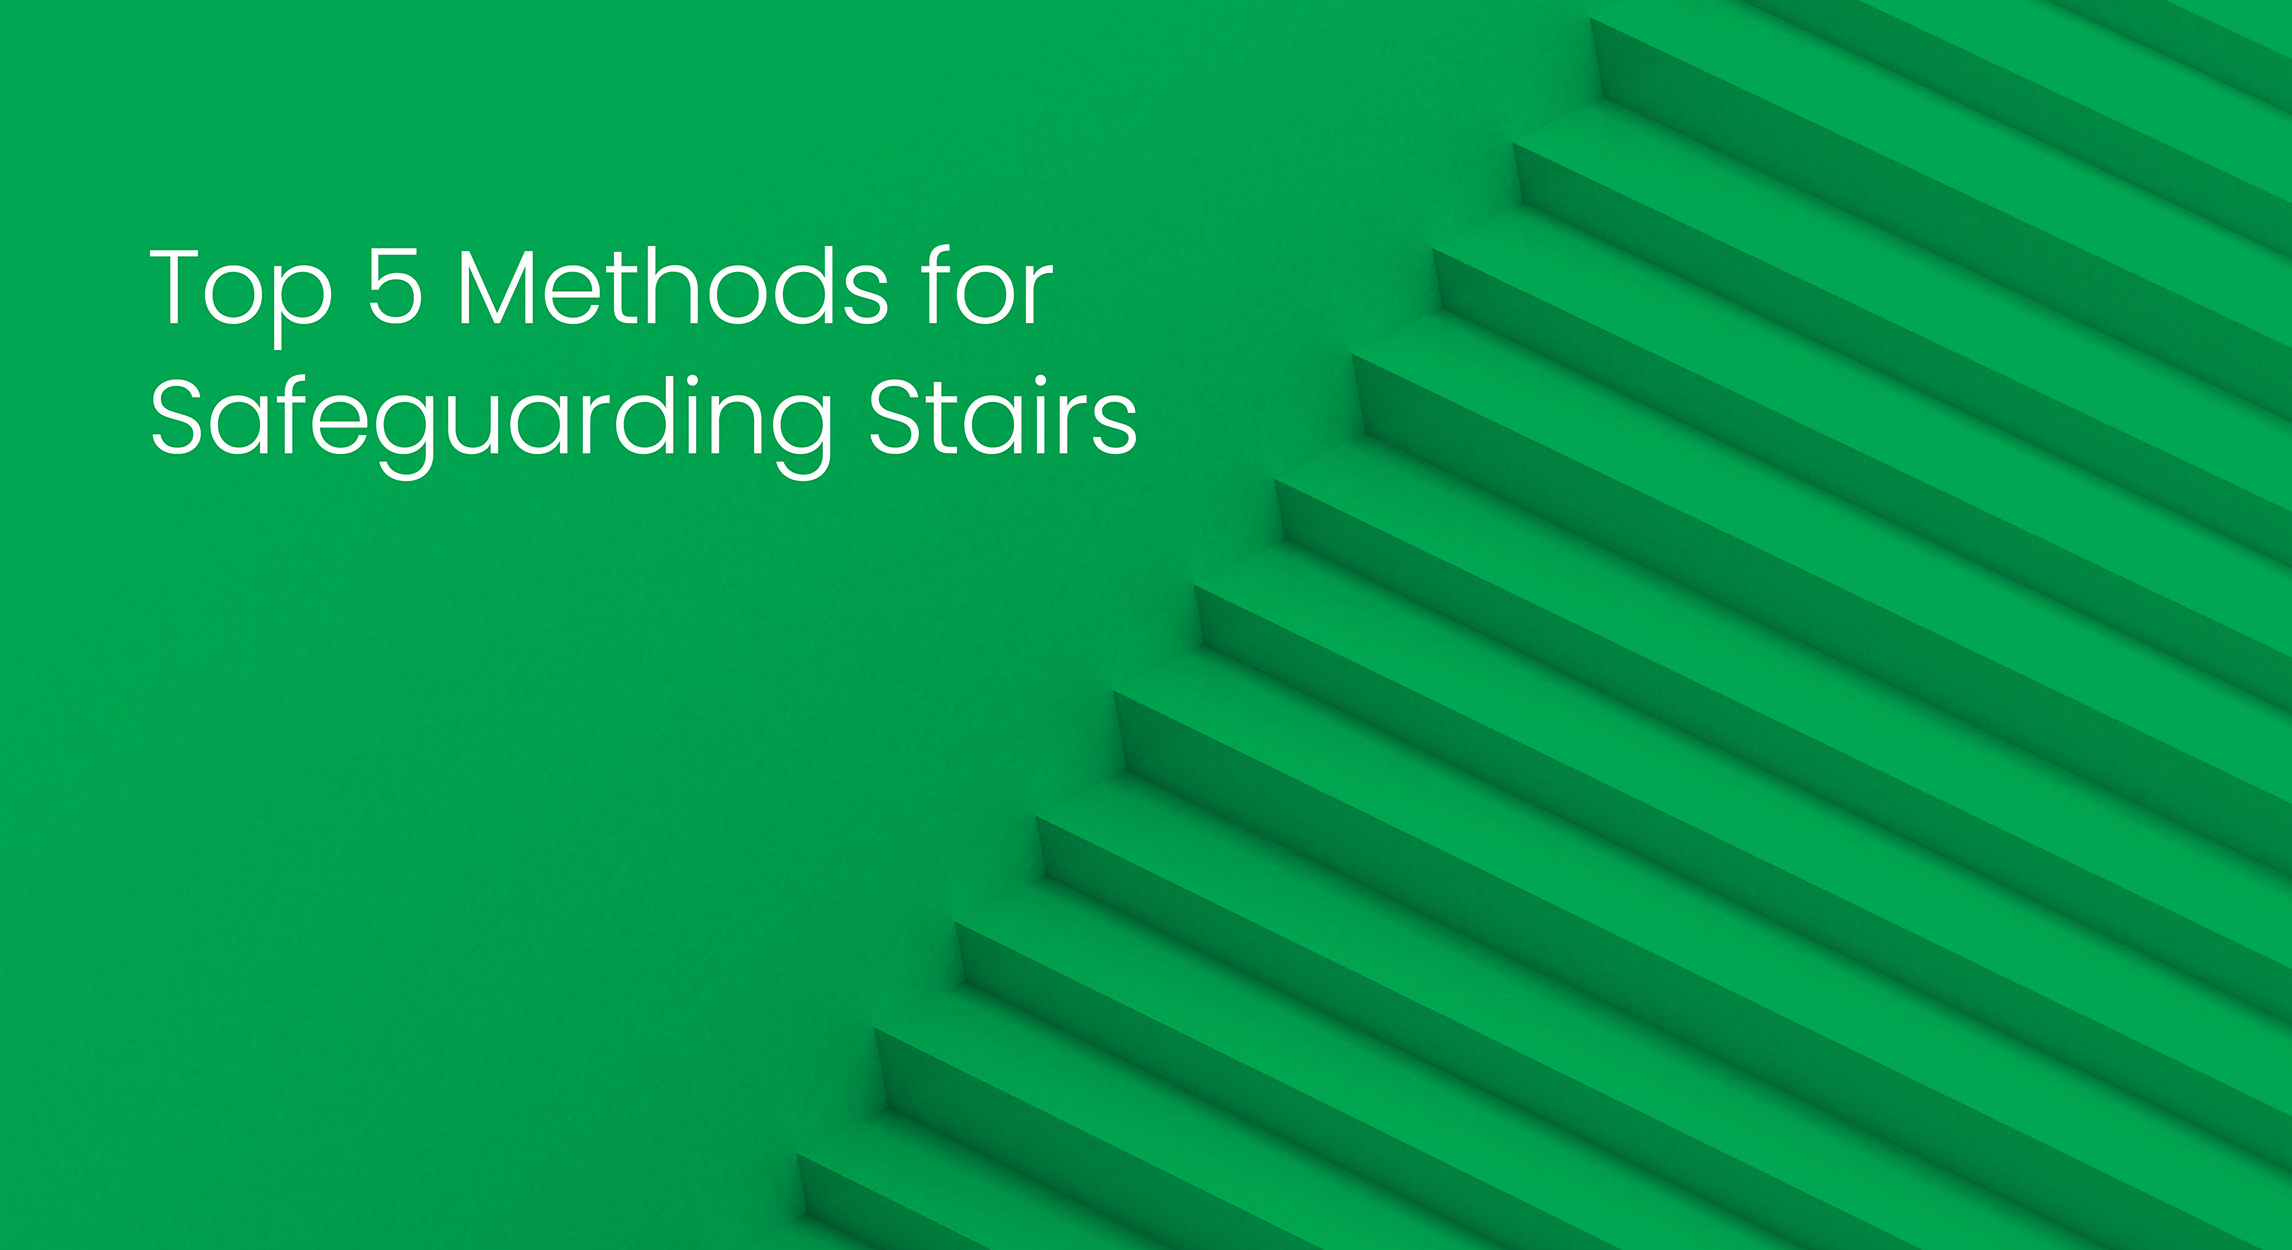 5 Ways to Safeguard Stairs During Construction